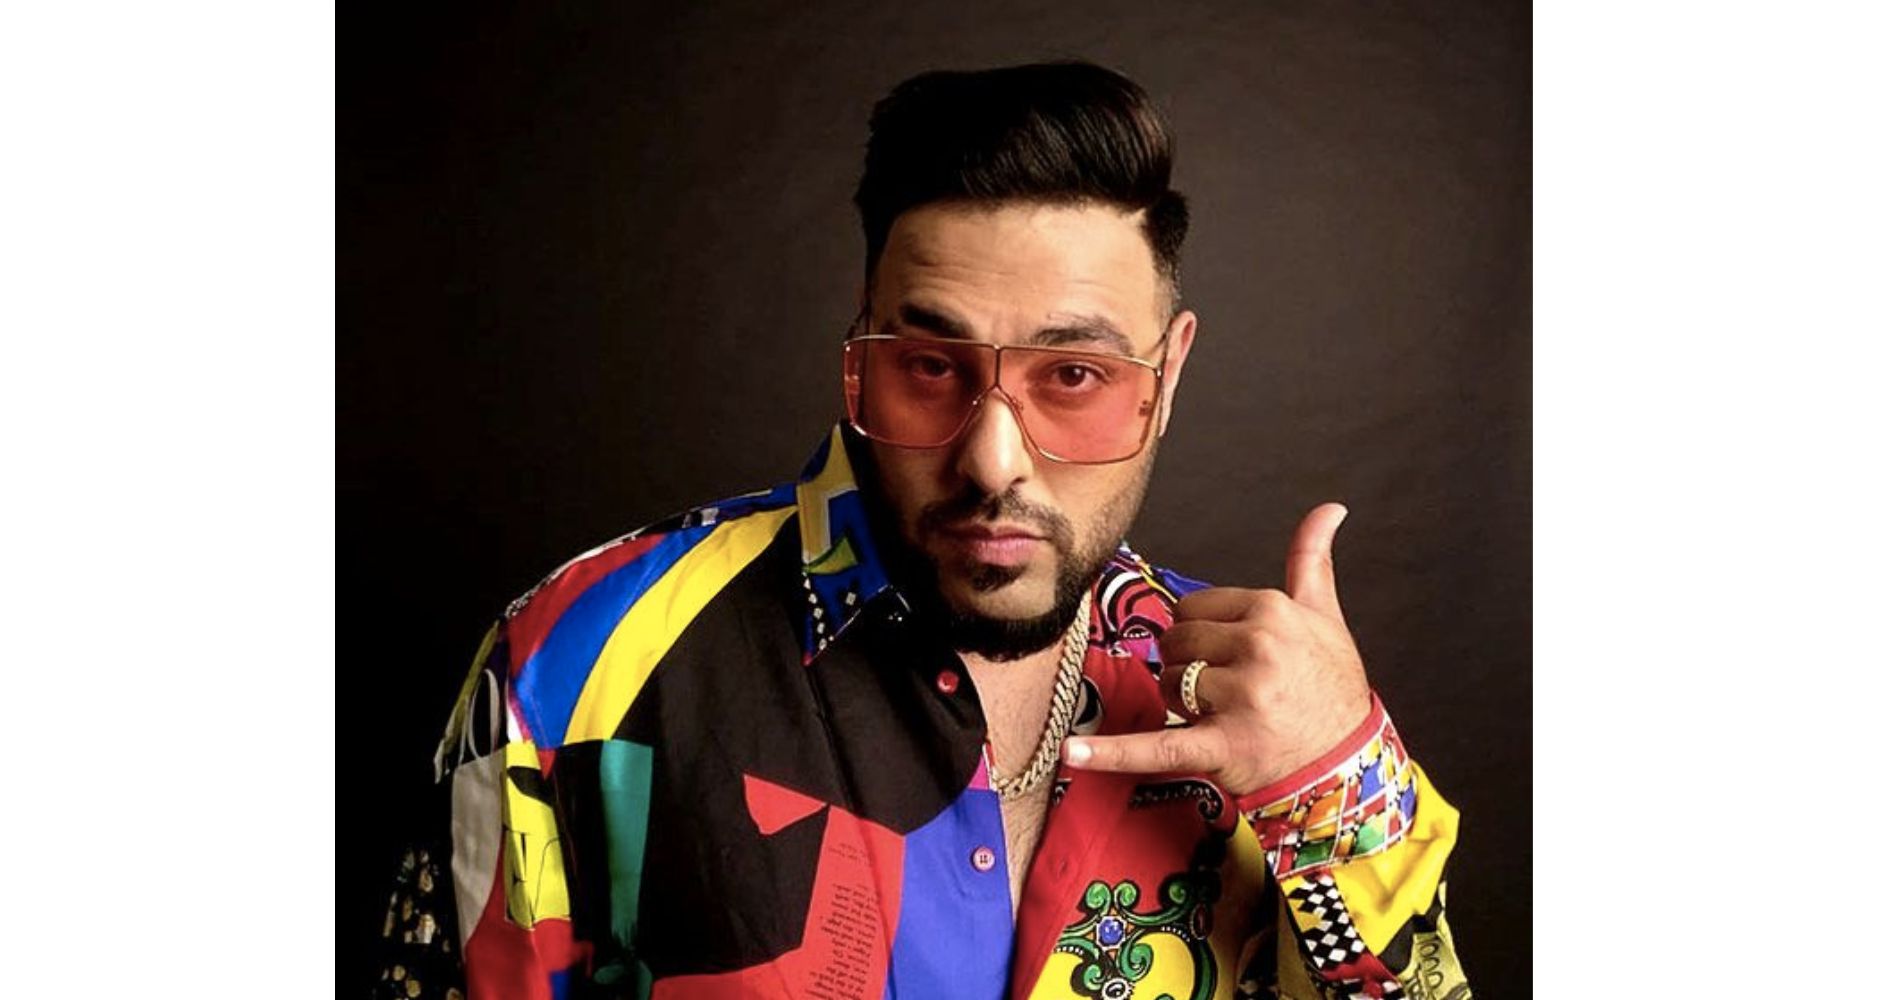 Badshah Receives Criticism For Condemning Music That Objectifies Women